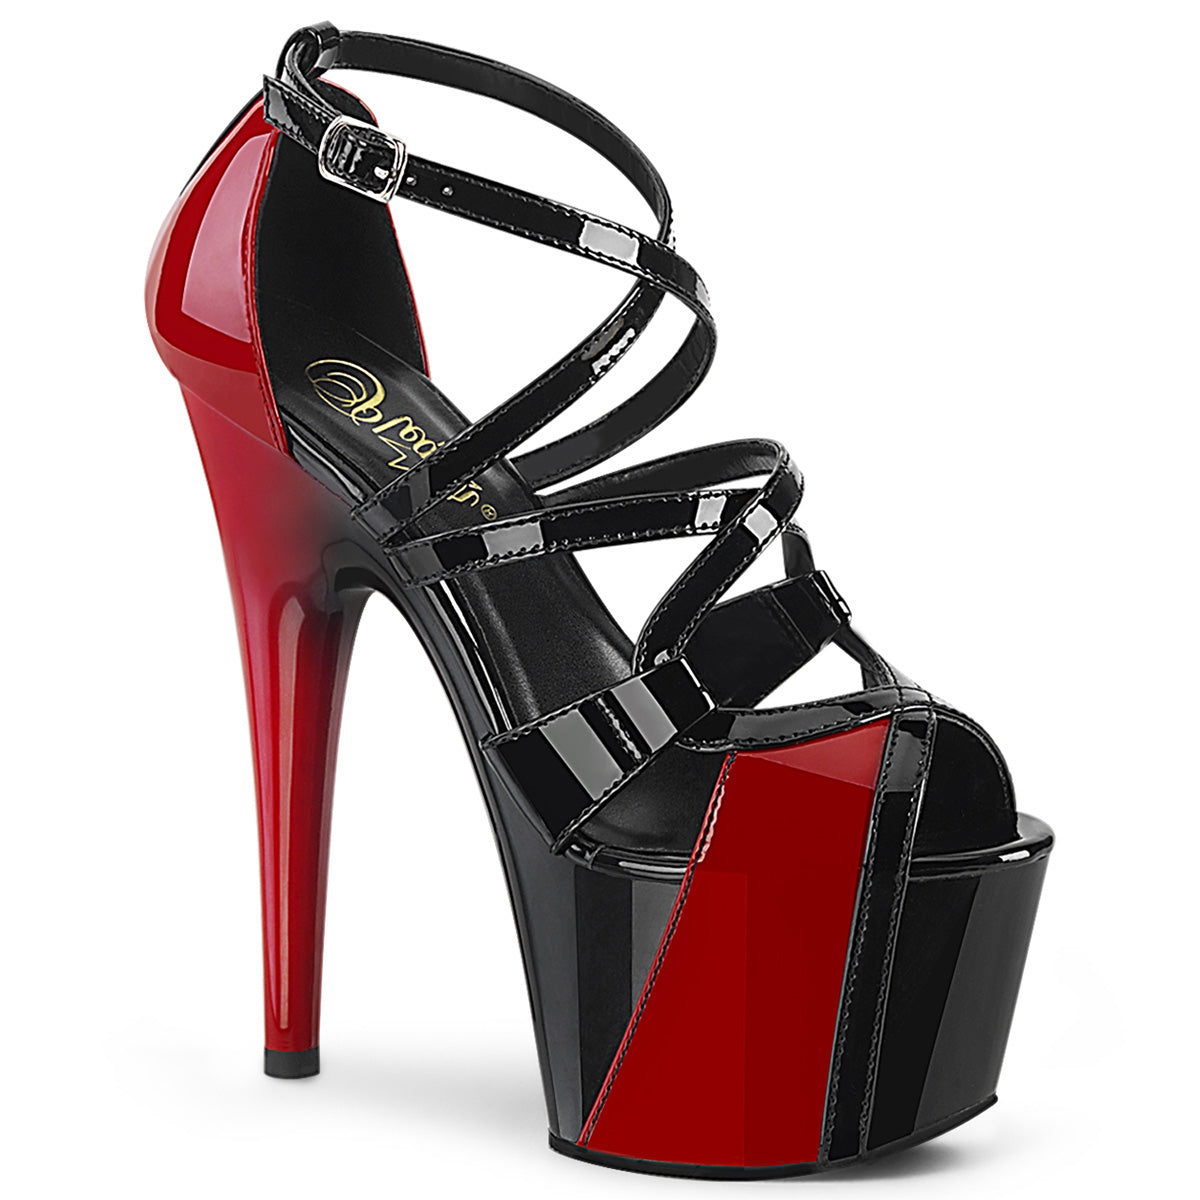 ADORE-764 Pleaser 7 "Heel Black and Red Strippers Sandals